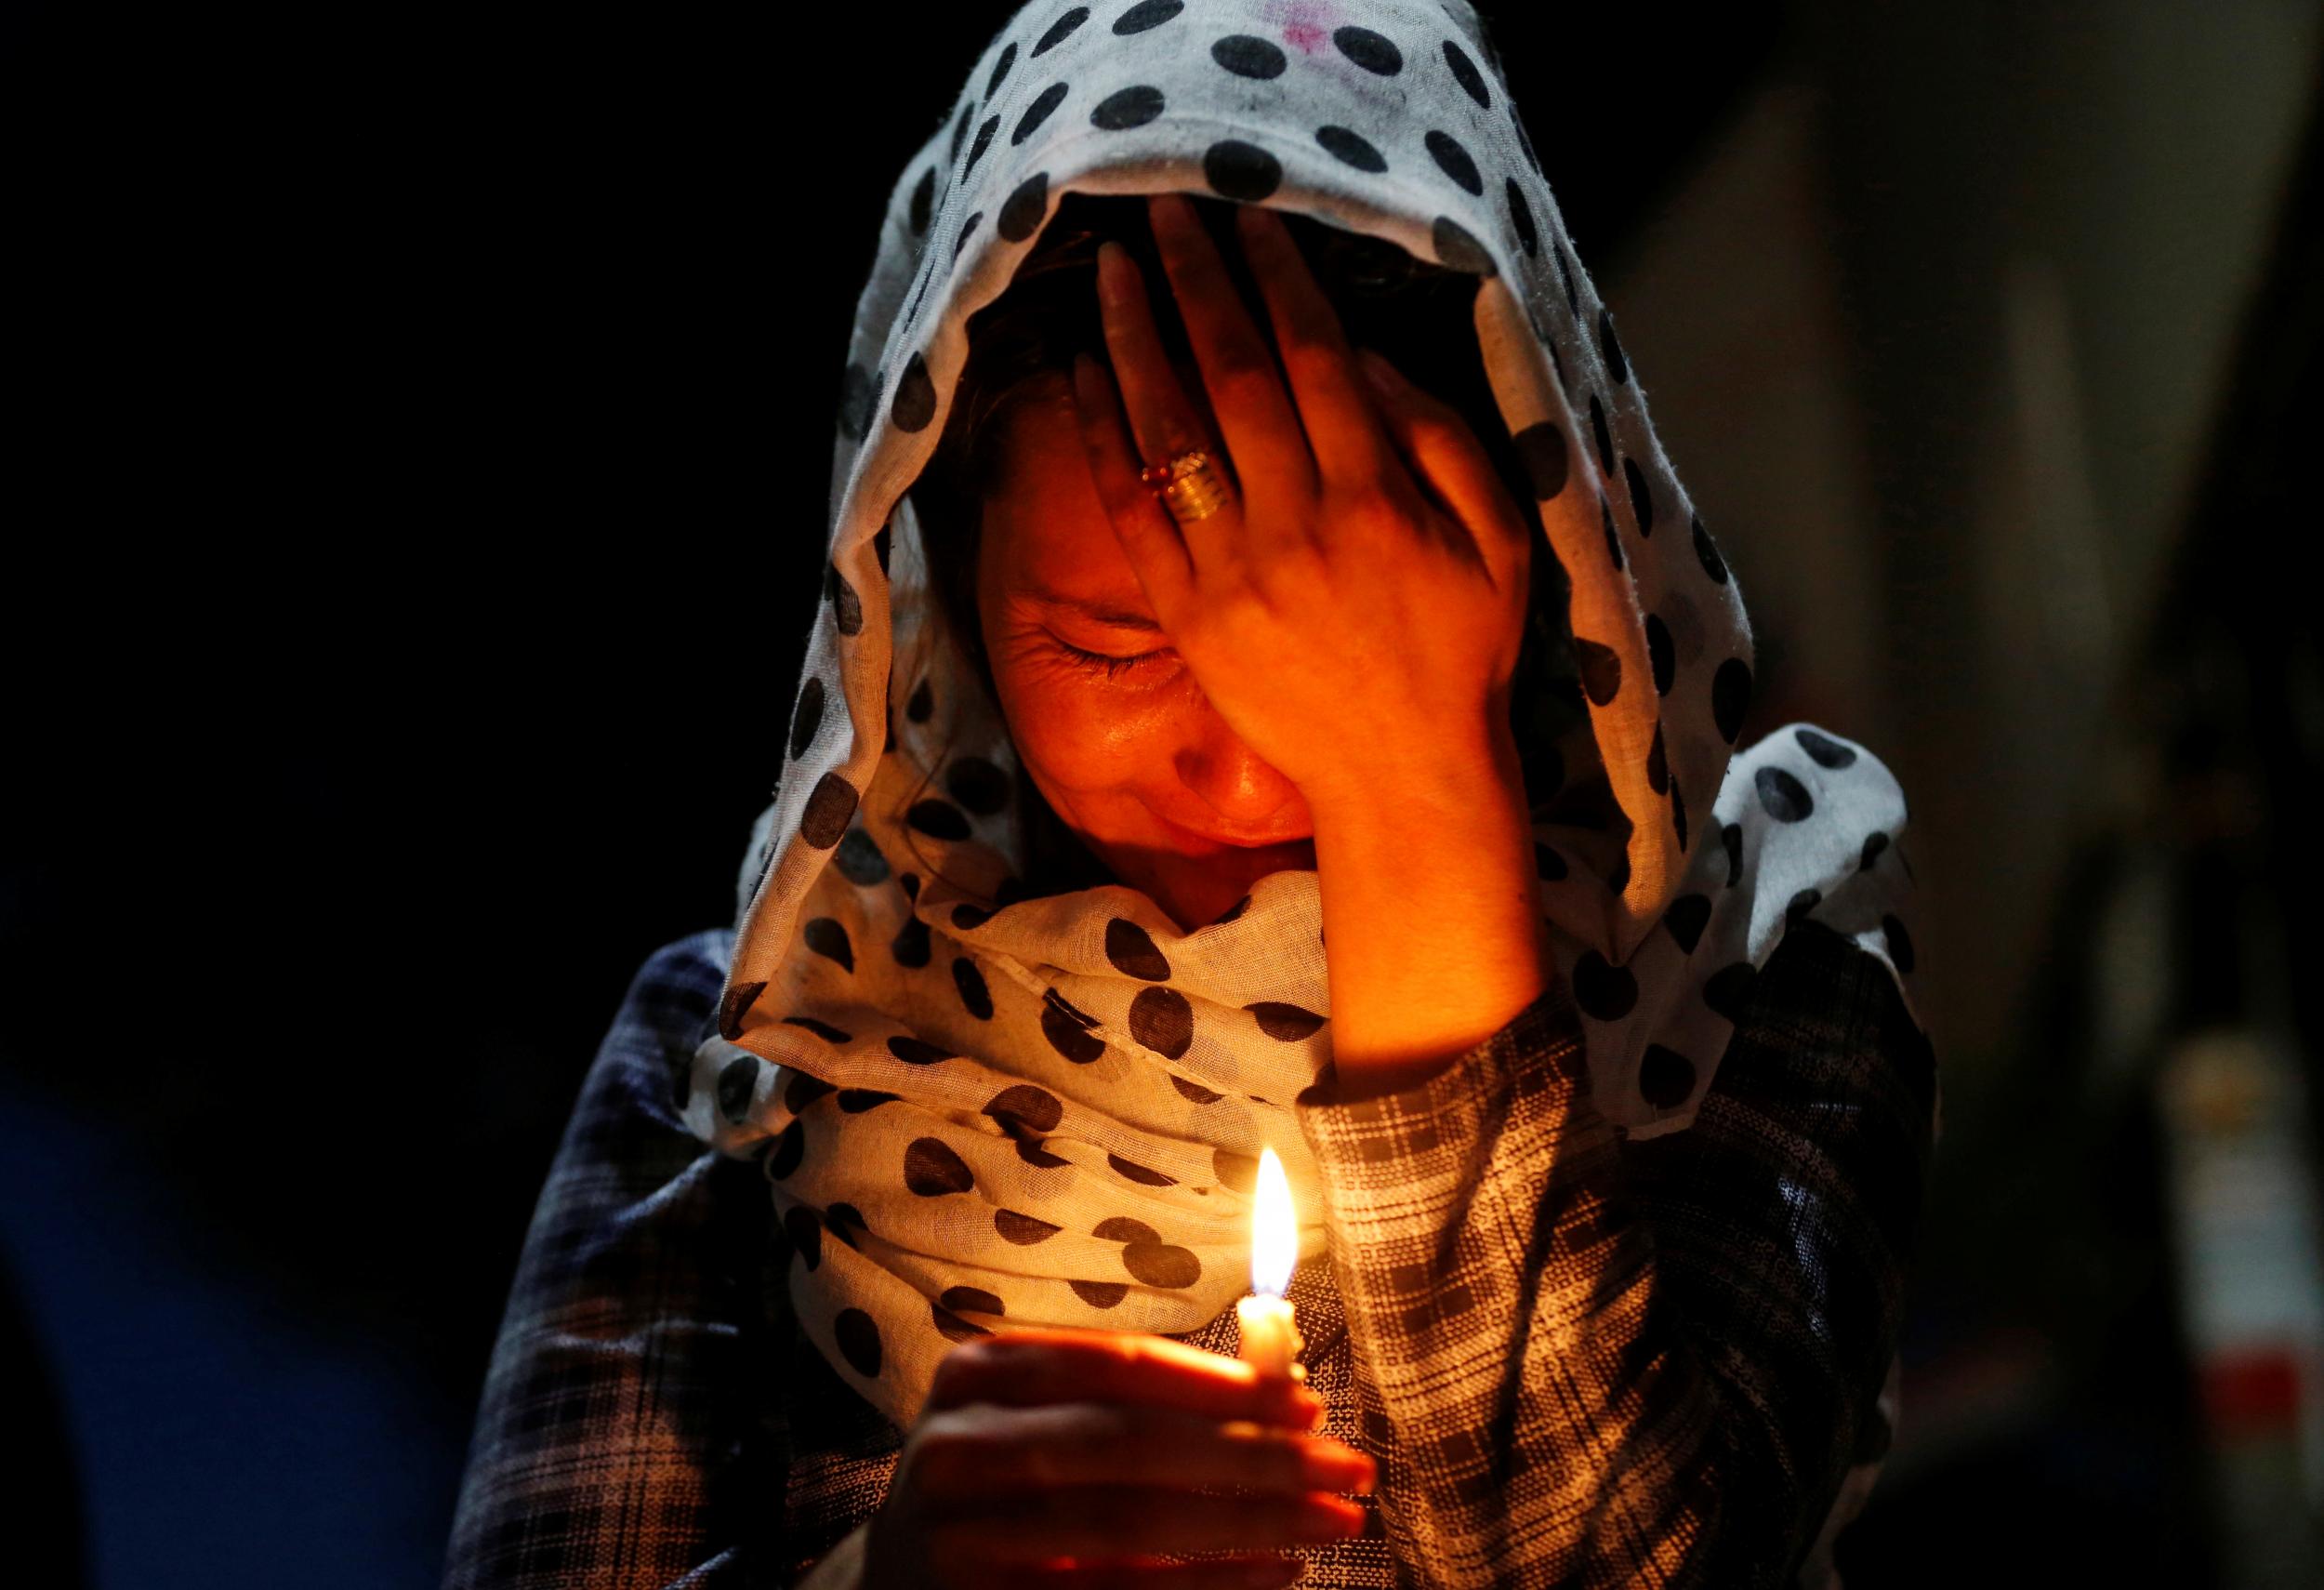 A woman cries as she holds a lit candle for the victims of Wednesday's blast in Kabul, Afghanistan on 1 June 2017